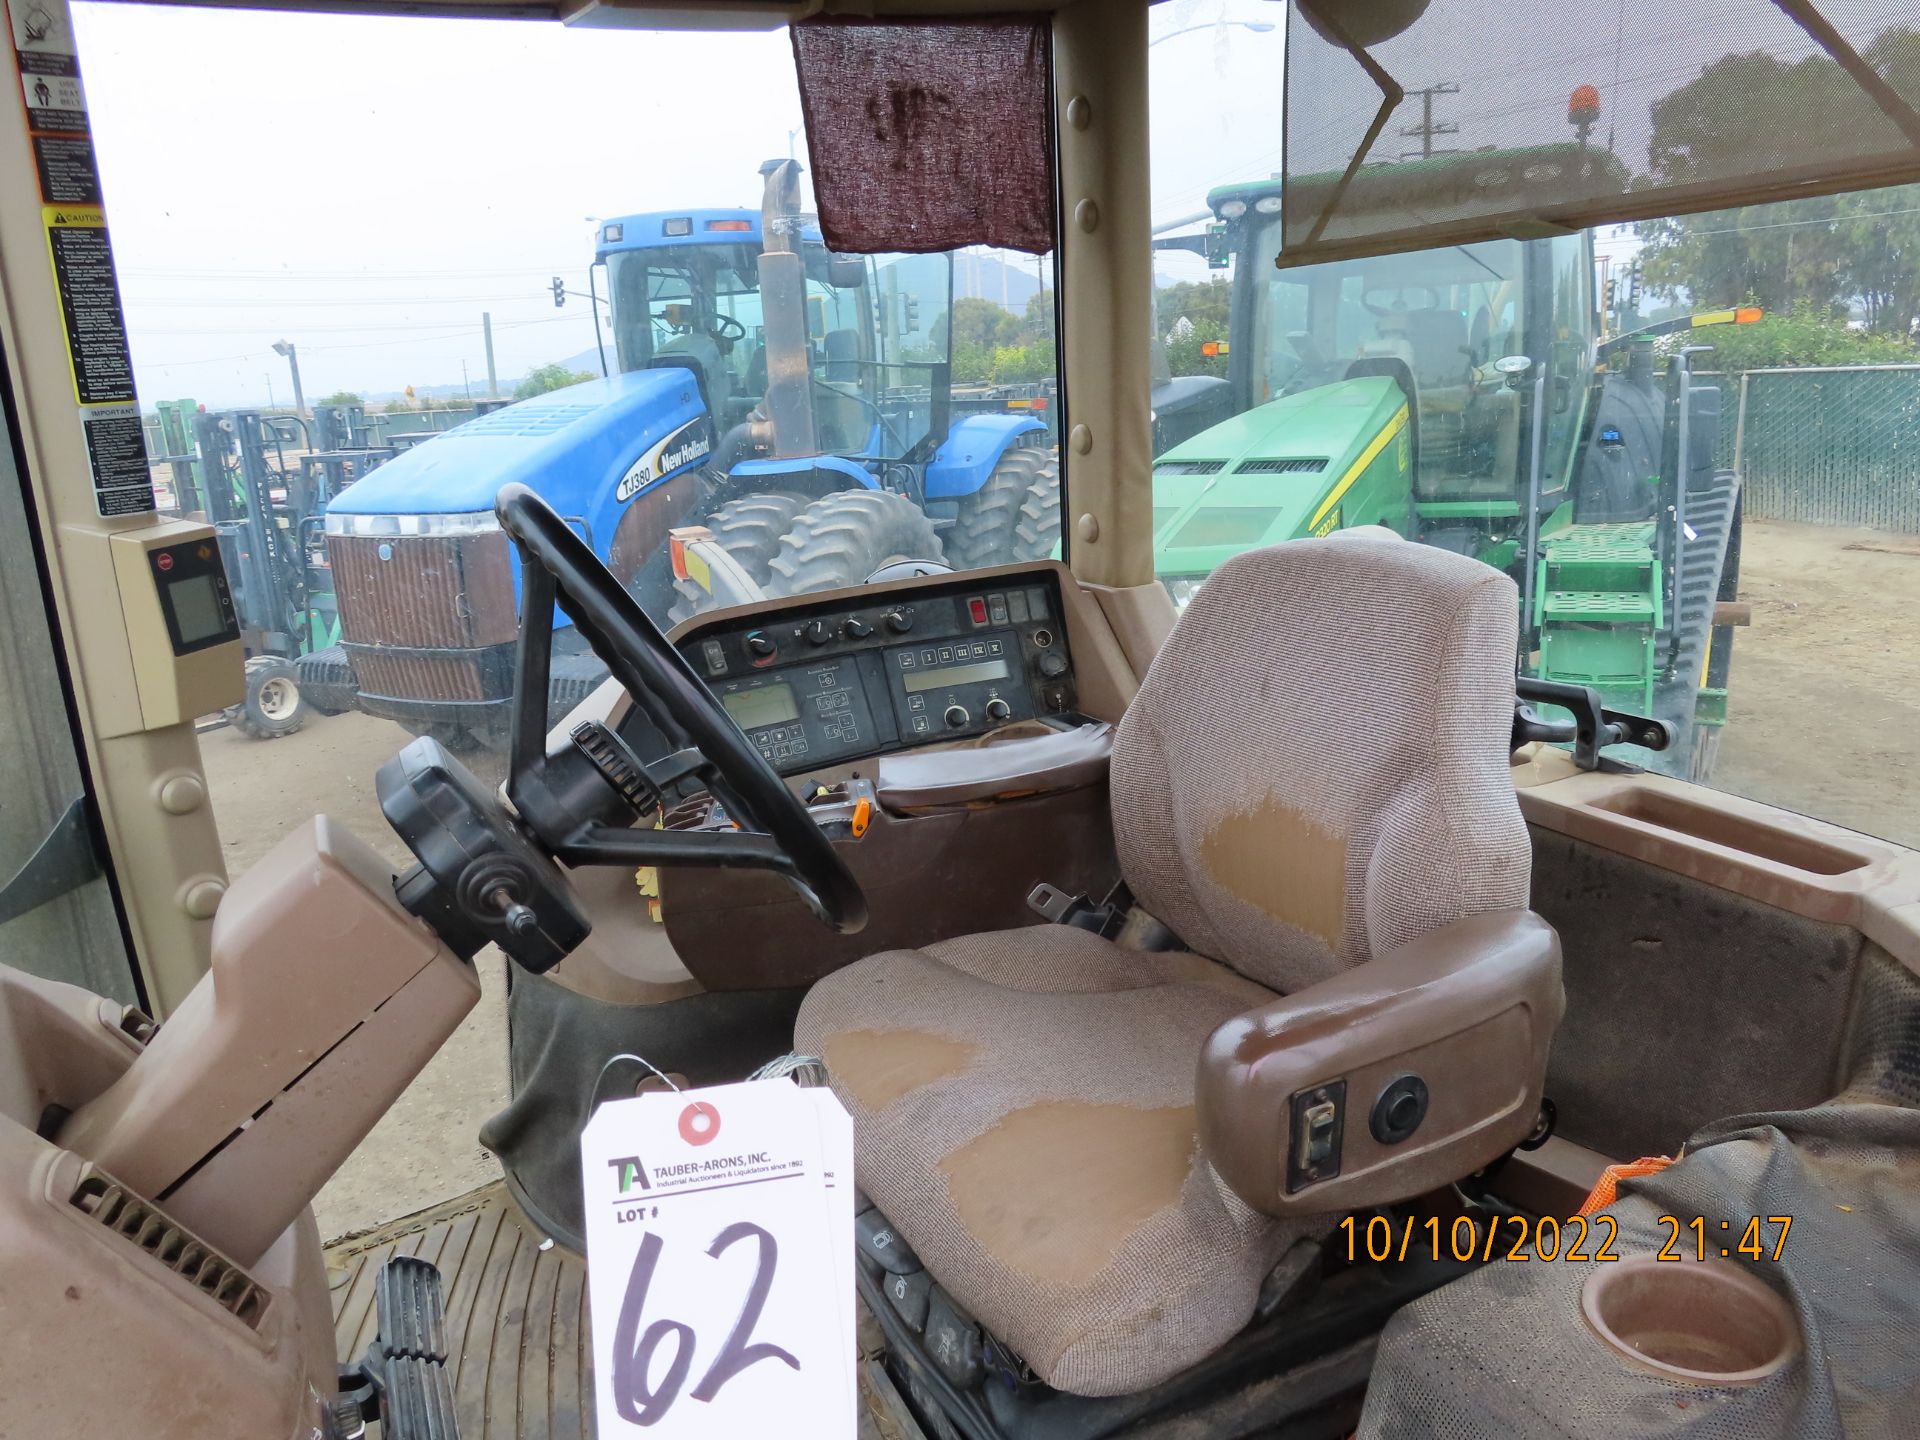 (2005) John Deere mod. 8420 Tractor, 4-WD Cab w/ Air Conditioning; Hours: 8,808; S/N RG6081H224300 - Image 6 of 10